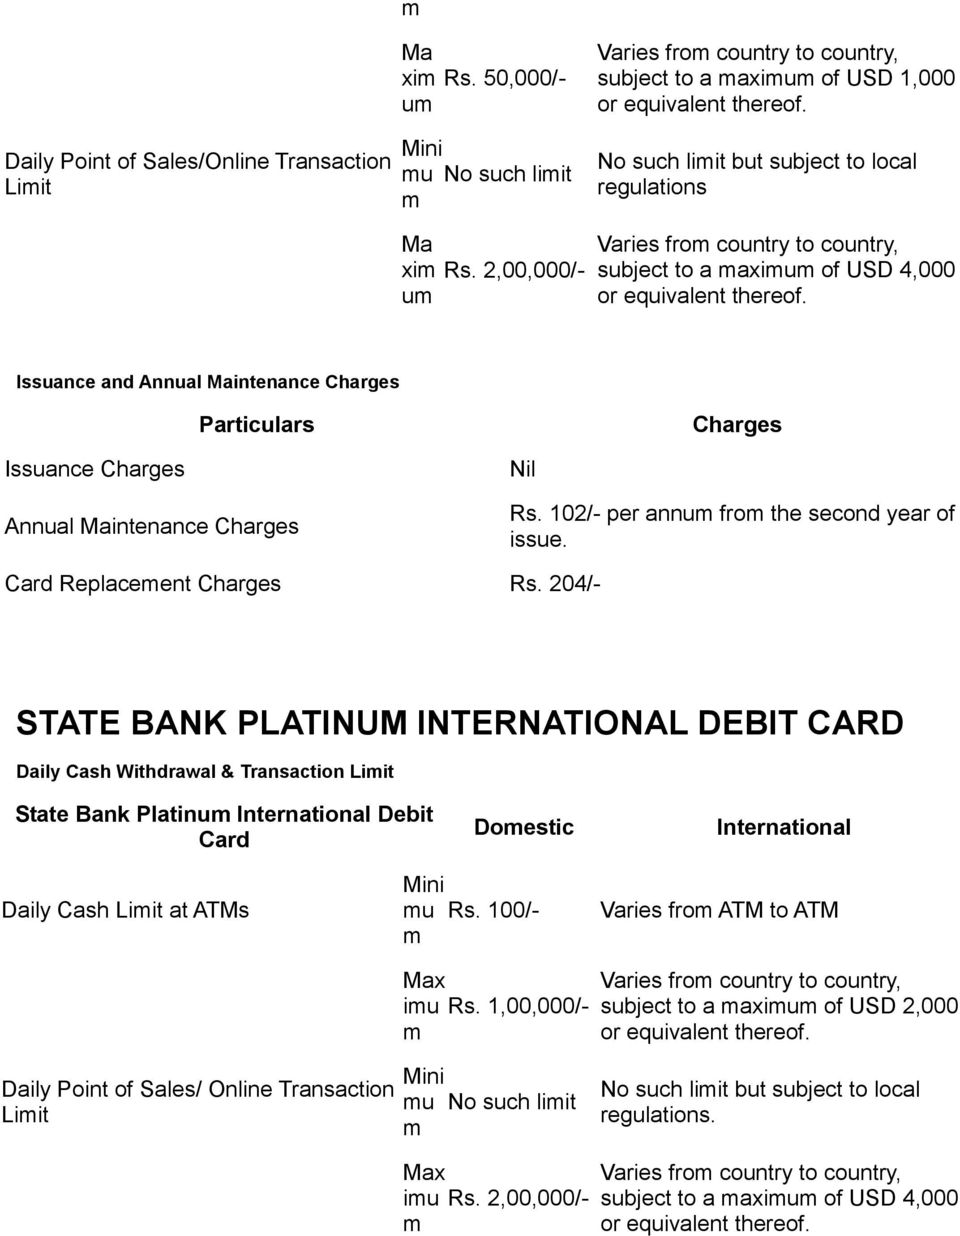 2,00,000/- u subject to a axiu of USD 4,000 Issuance and Rs. 102/- per annu fro the second year of Card Replaceent Rs.